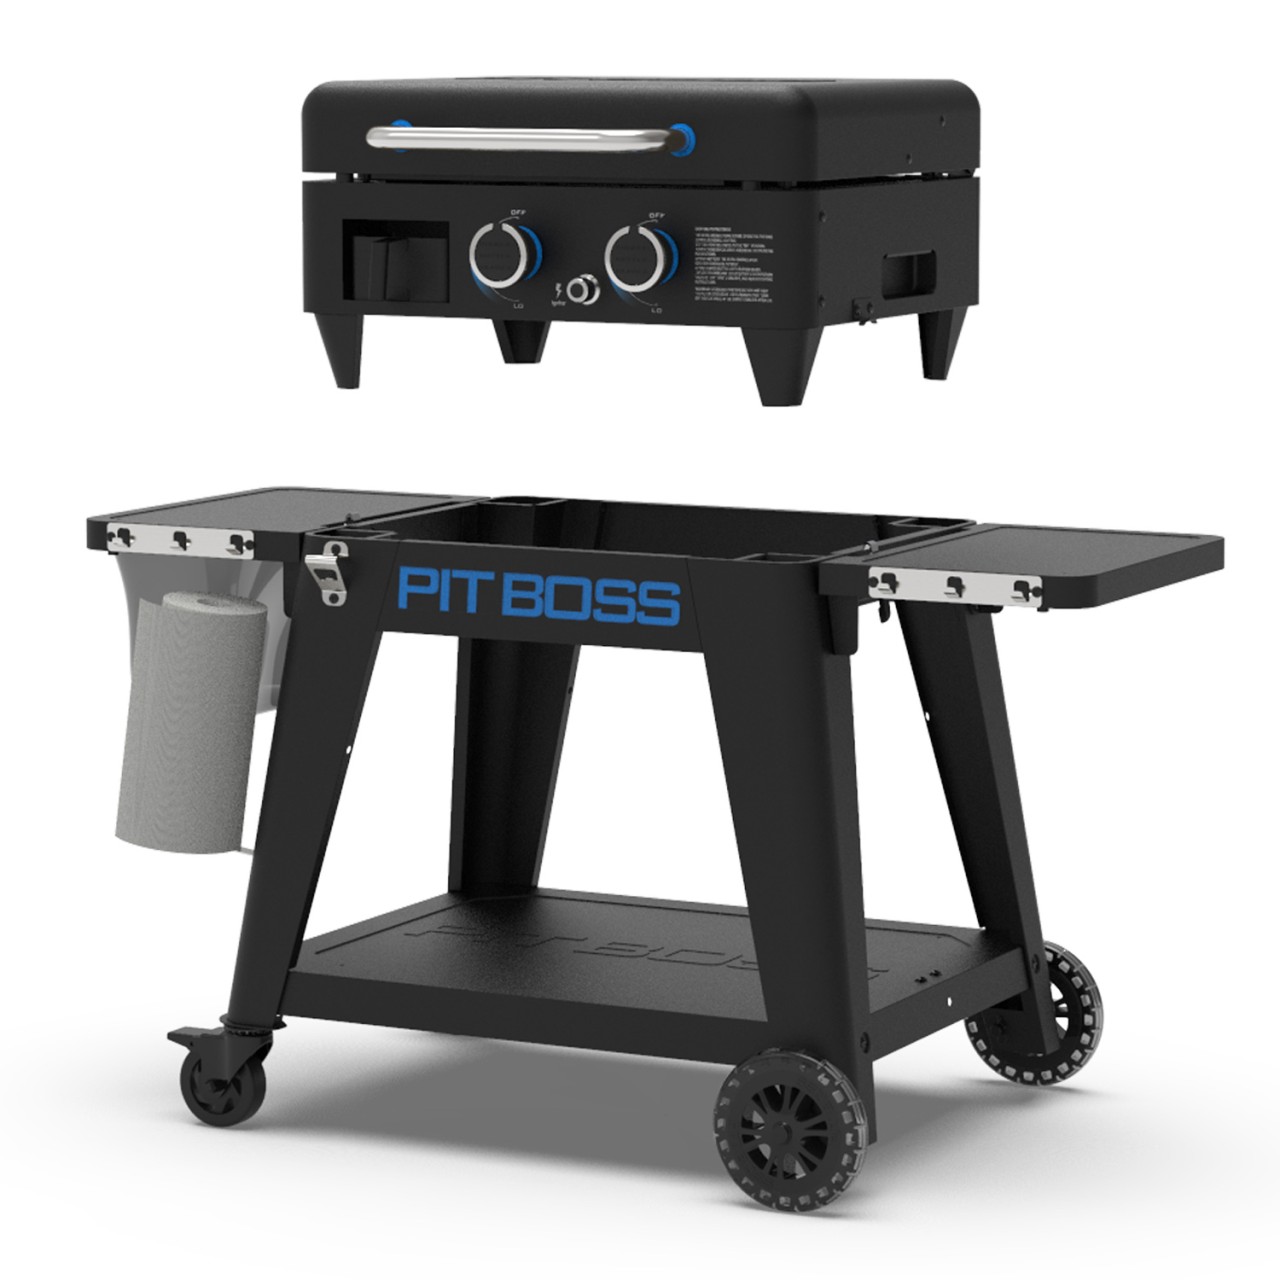 PIT BOSS ULTIMATE PLANCHA 2 – mit Untergestell – 50mbar